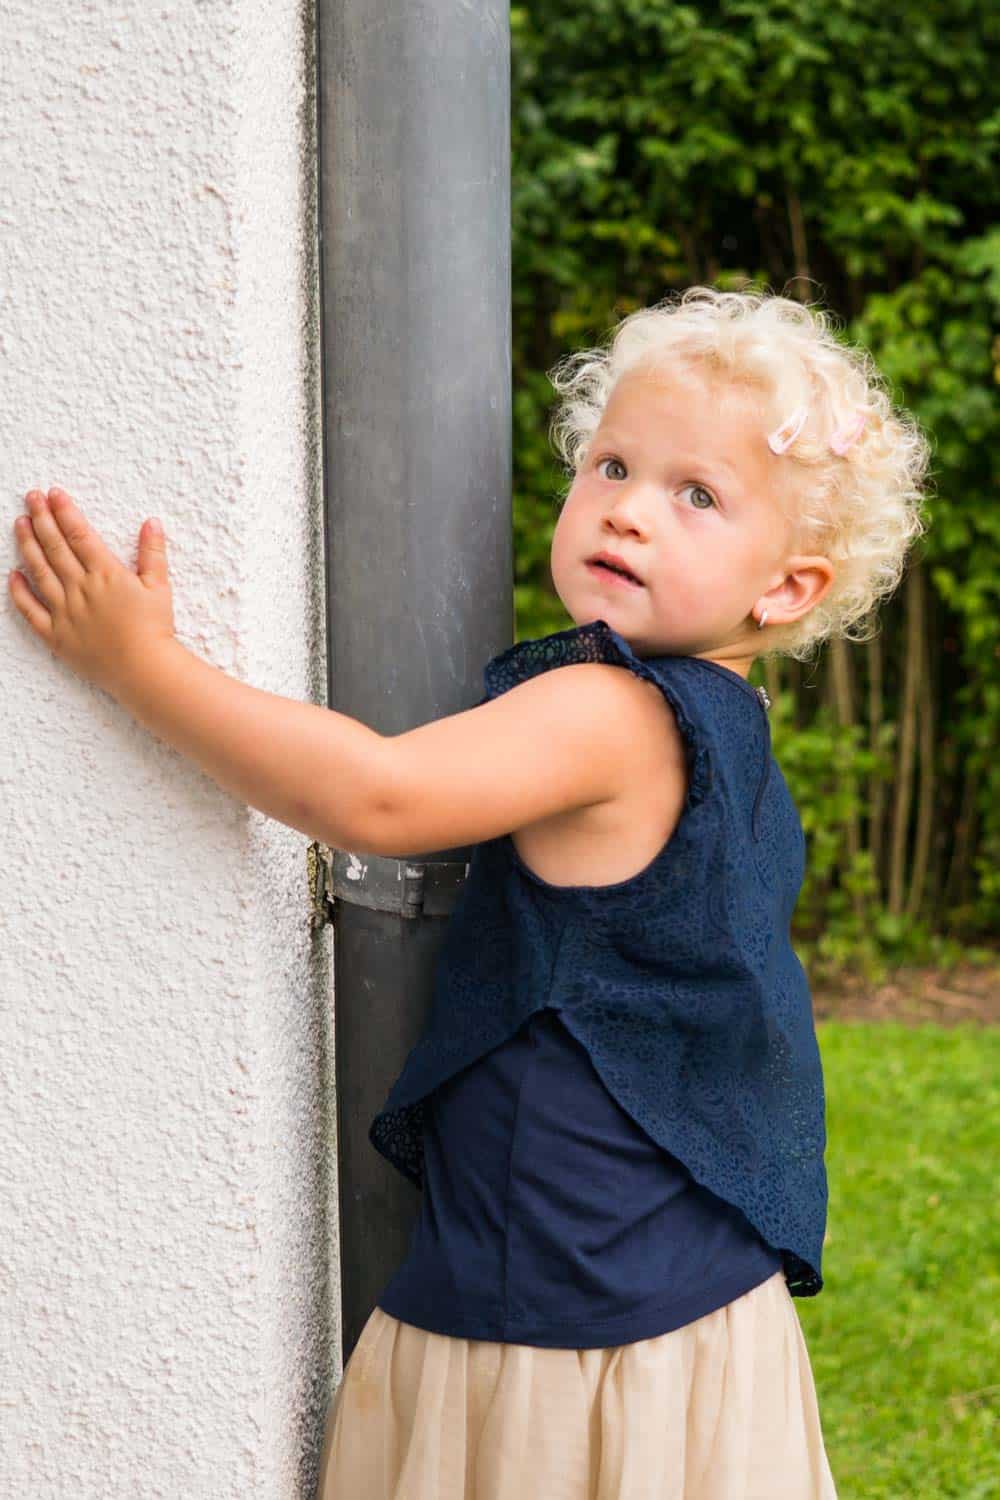 Little girl with a blue top and beige skirt hugging a wall with a post.